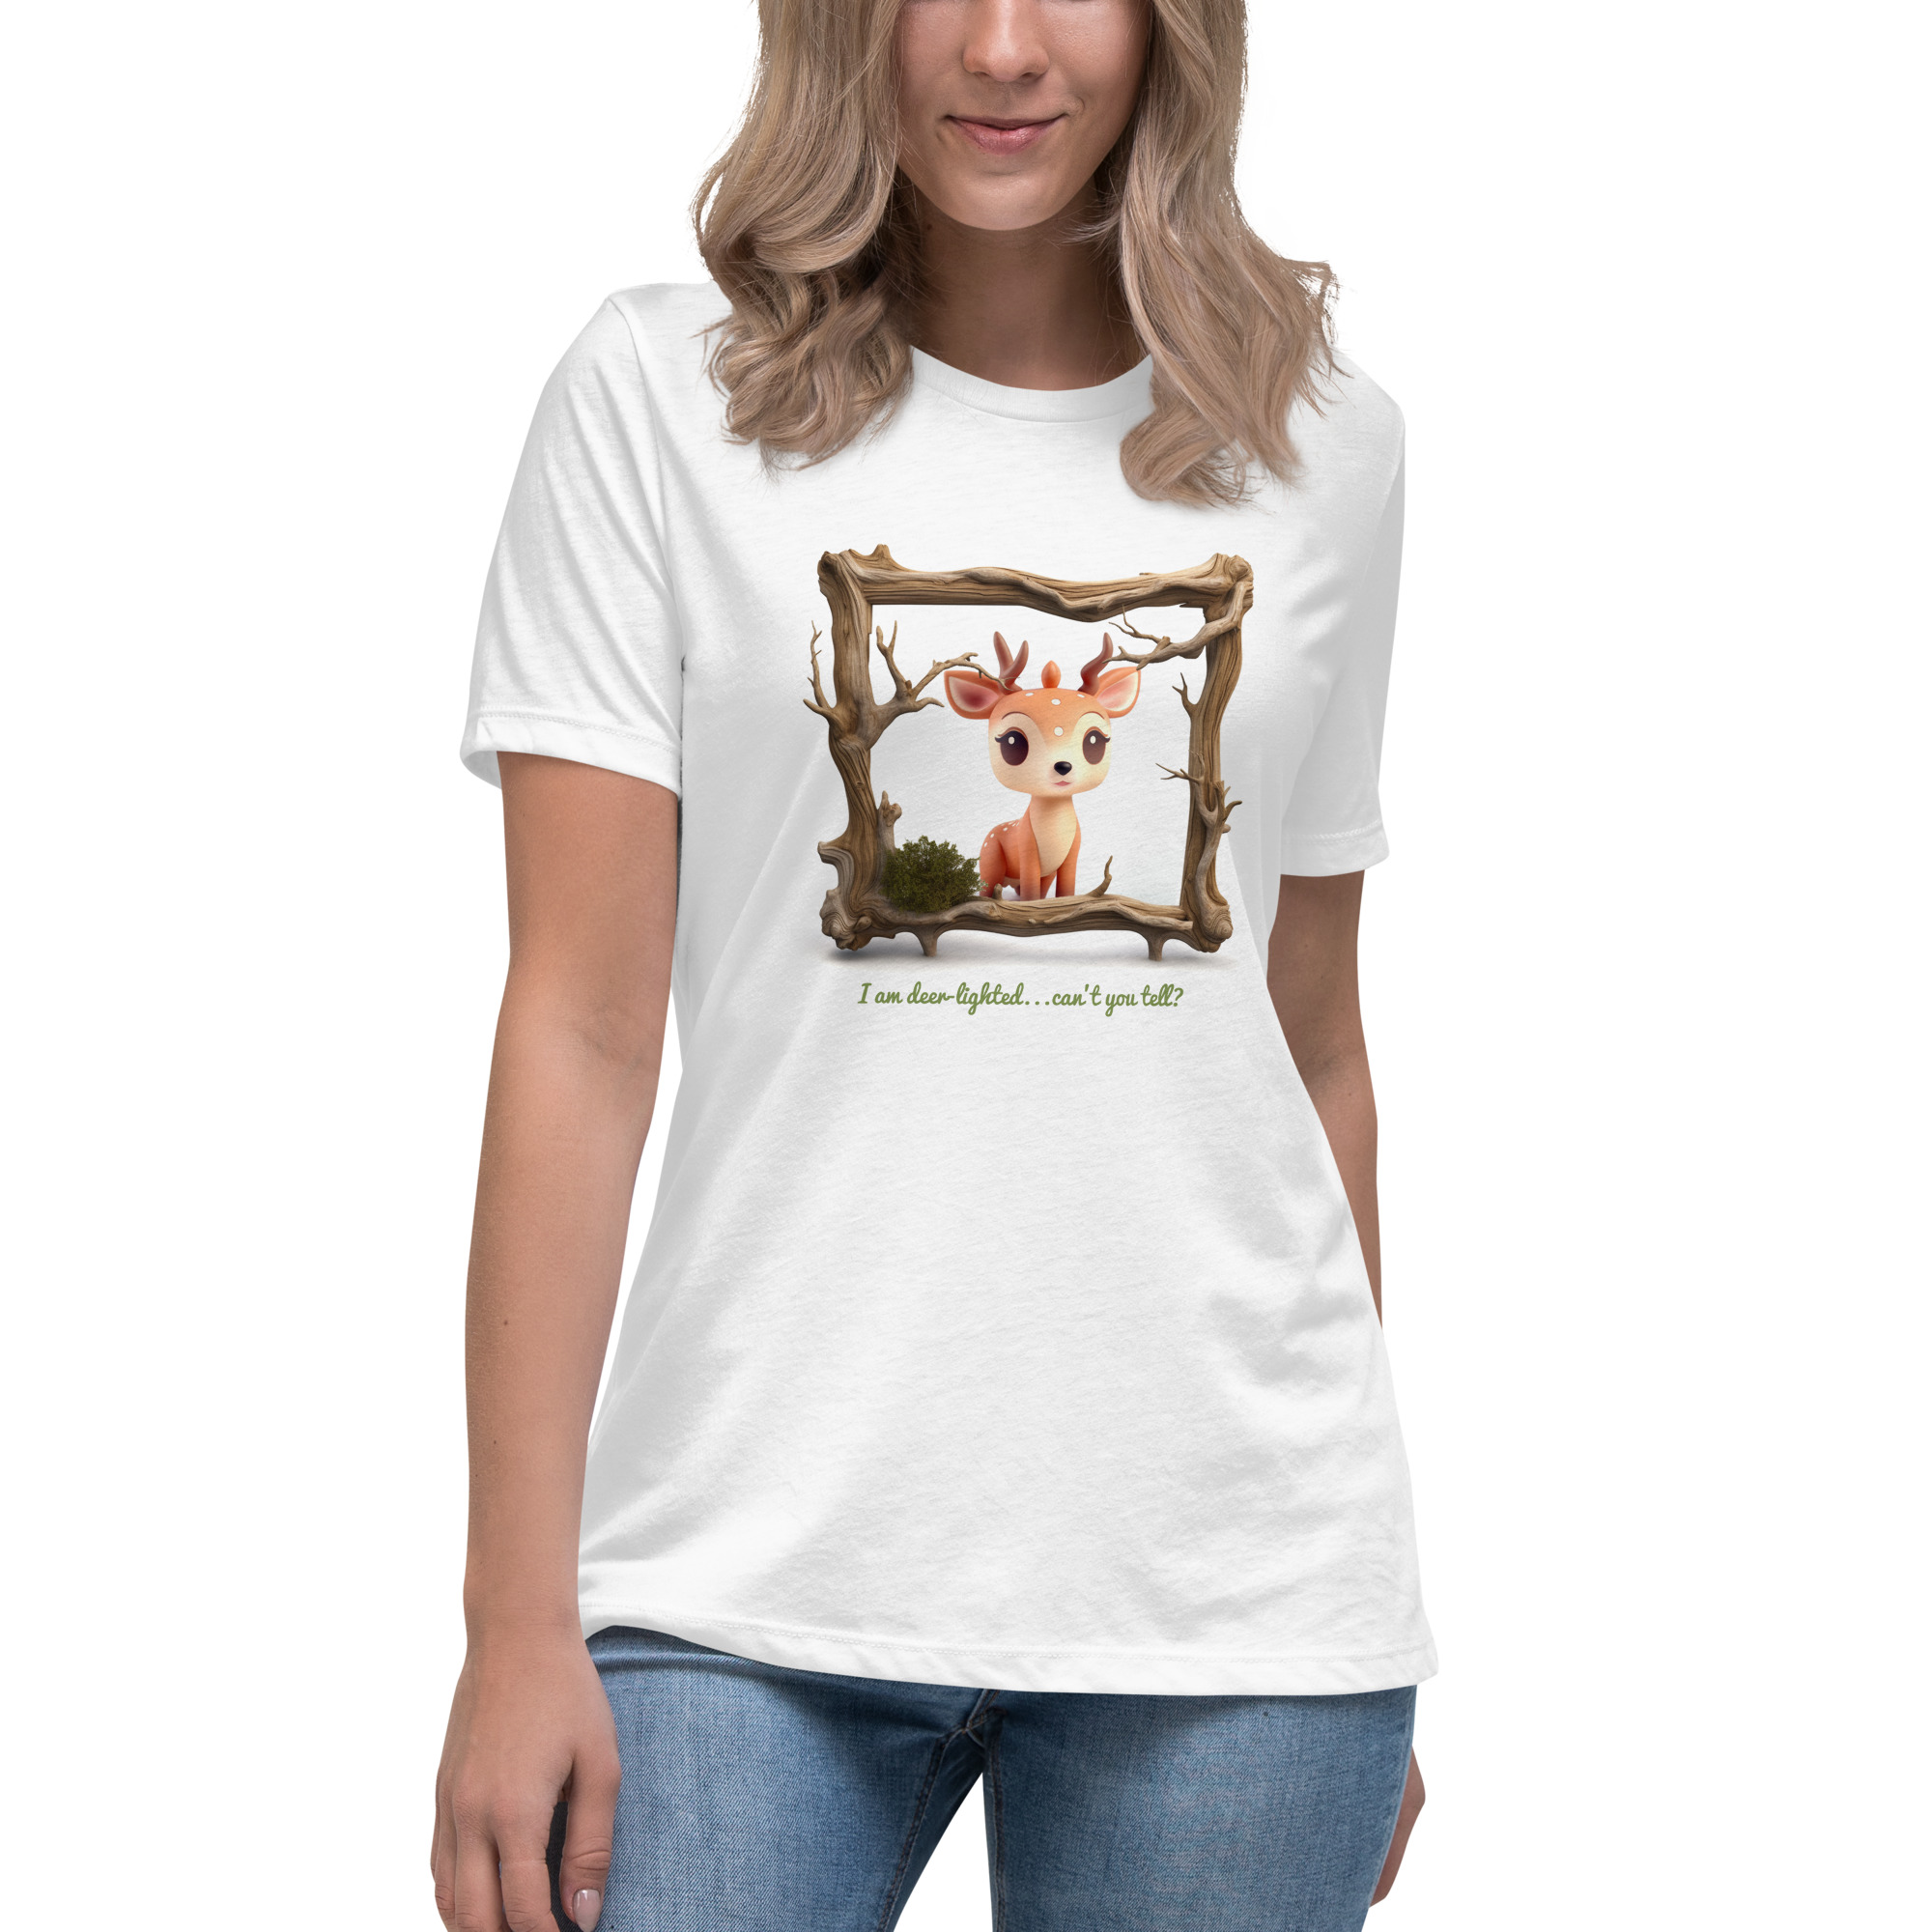 I'm Deer-lighted...can't you tell? | Women's T-shirt